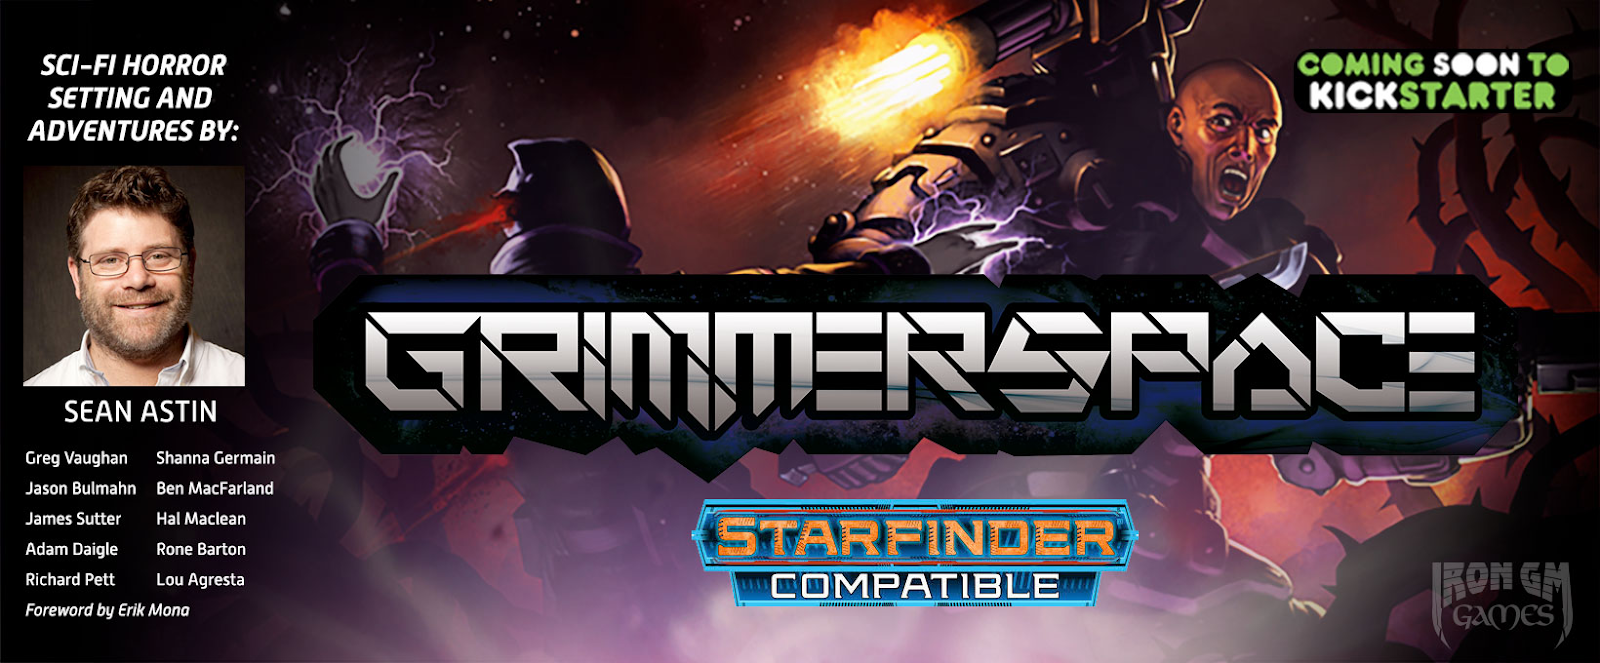 Modiphius named by Iron GM Games as worldwide distributor of Grimmerspace – a sci-fi horror RPG co-developed by actor Sean Astin